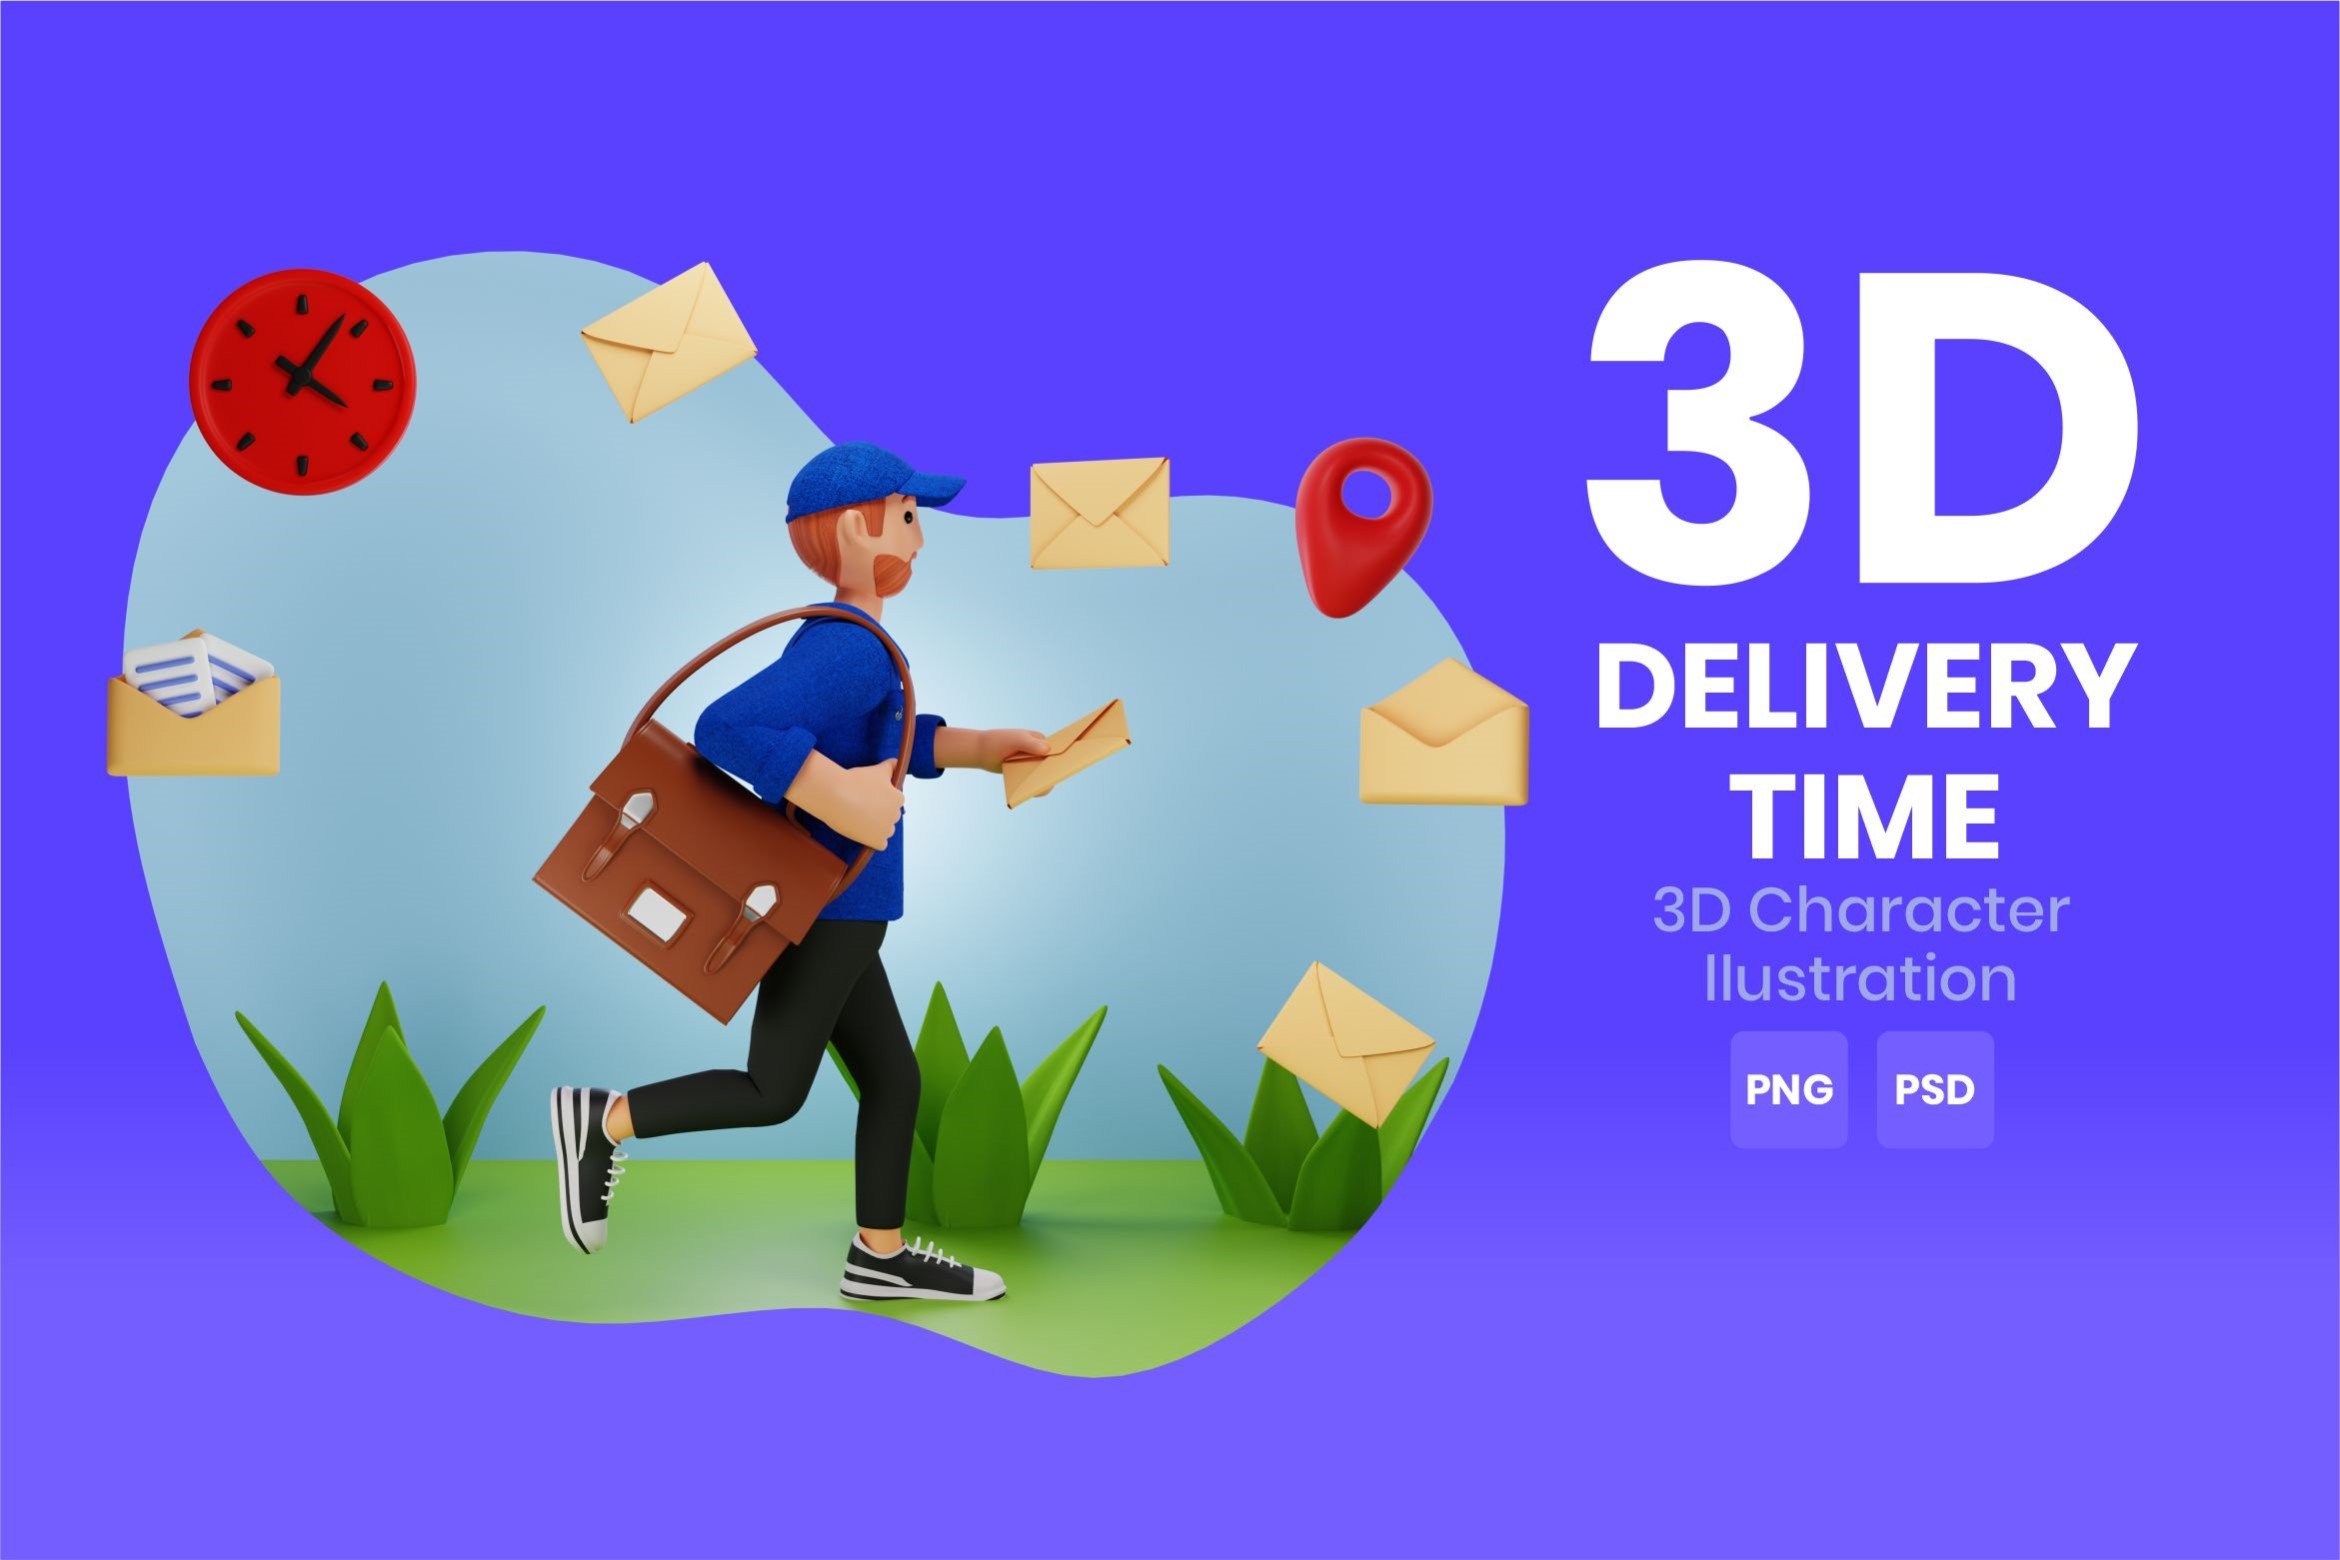 Delivery Time 3D Character cover image.